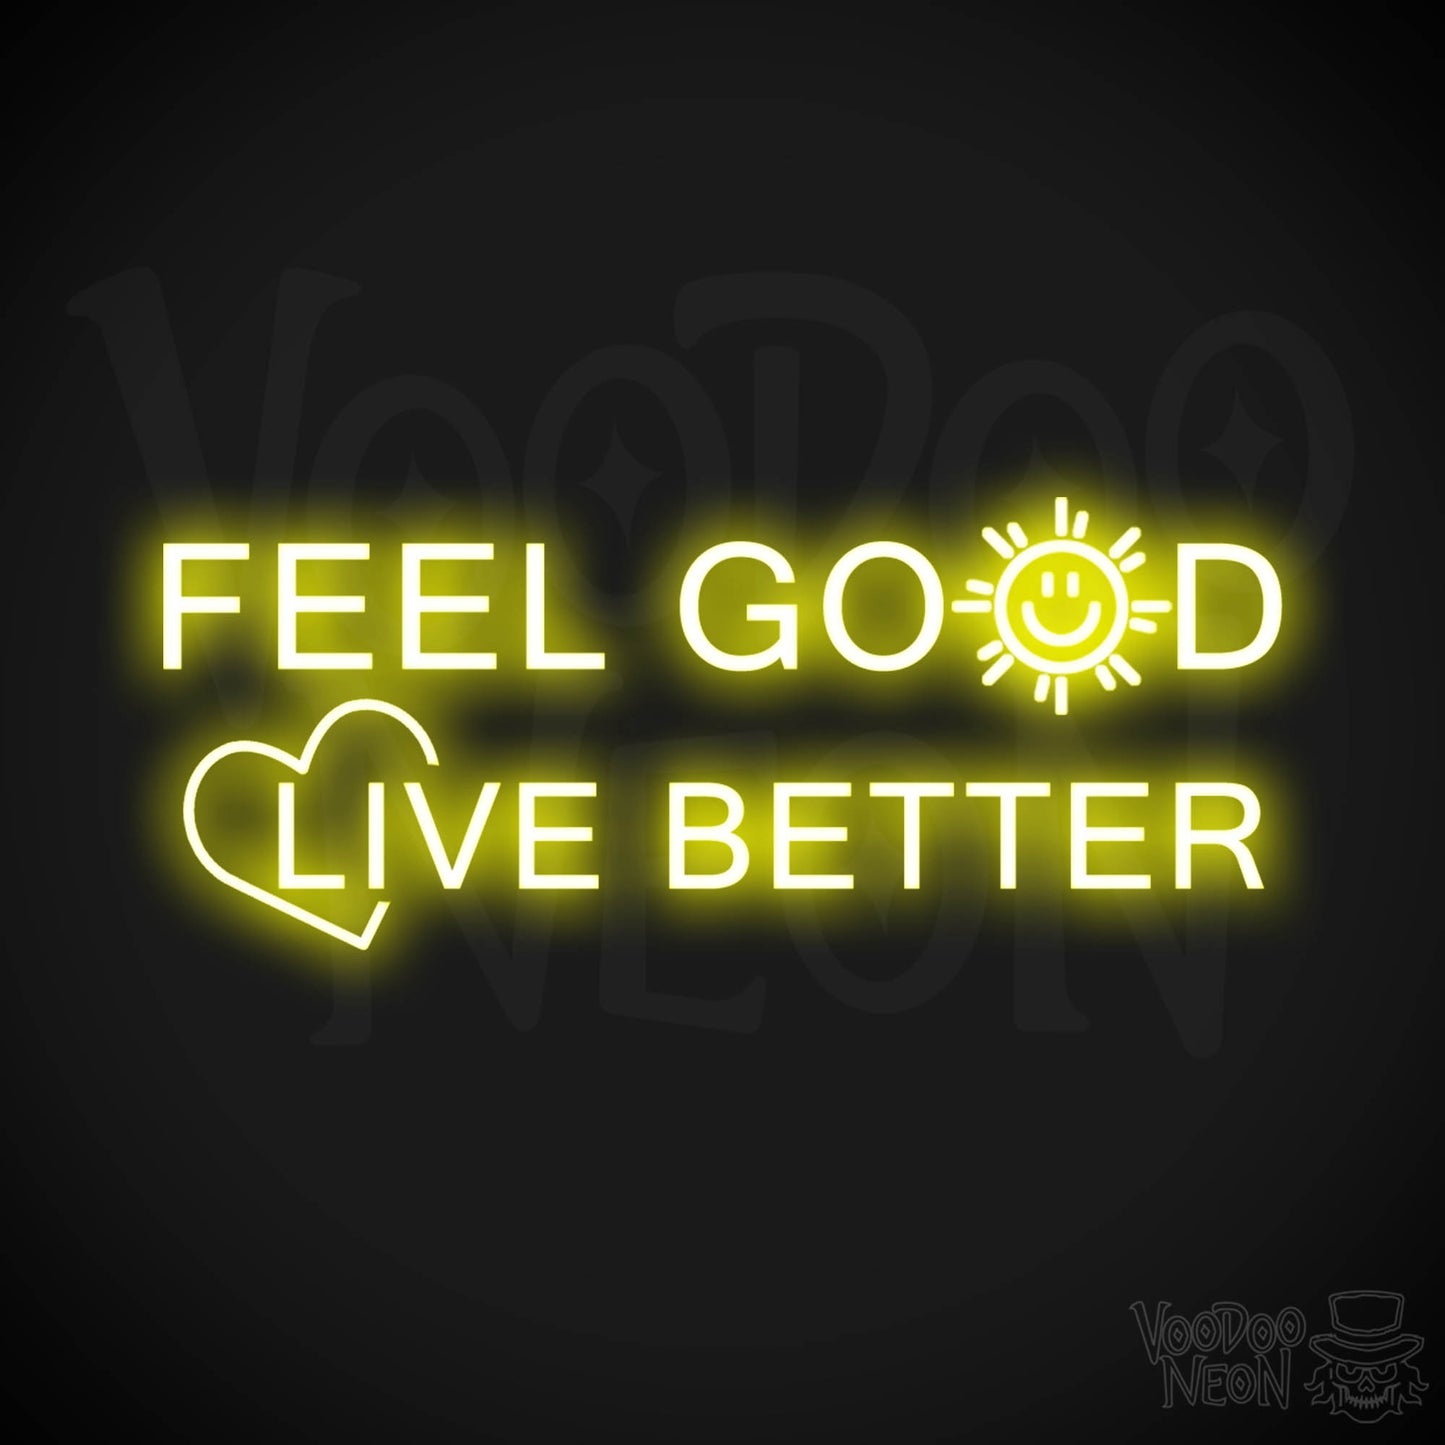 Feel Good Live Better Neon Sign - Feel Good Live Better Sign - Color Yellow